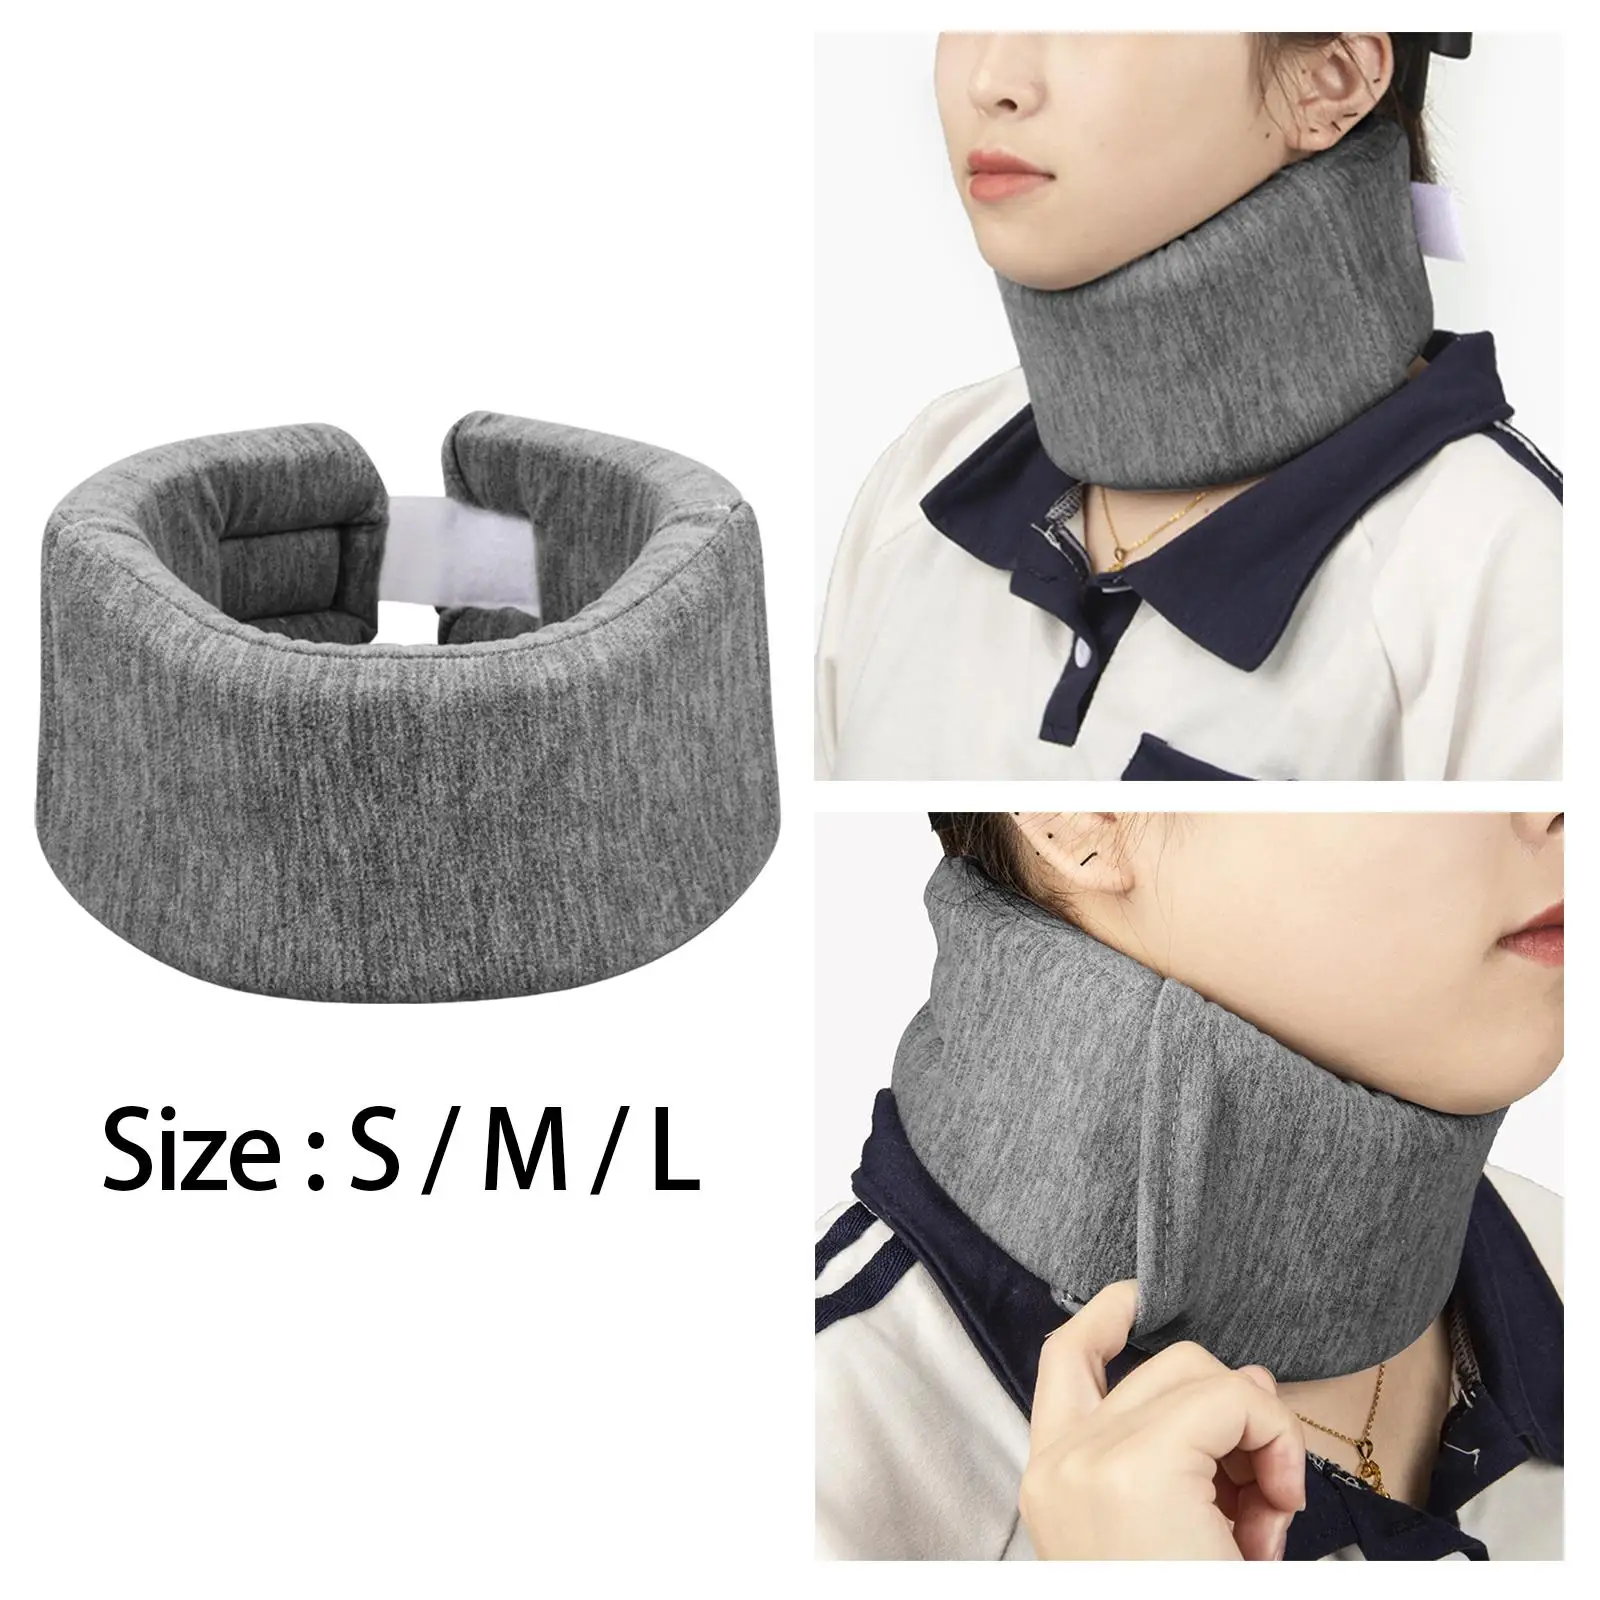 Traveling Pillow Travel Essentials Soft Portable Comfortable Neck Pillow for Traveling on Airplane for Car Travel Home Rest Use